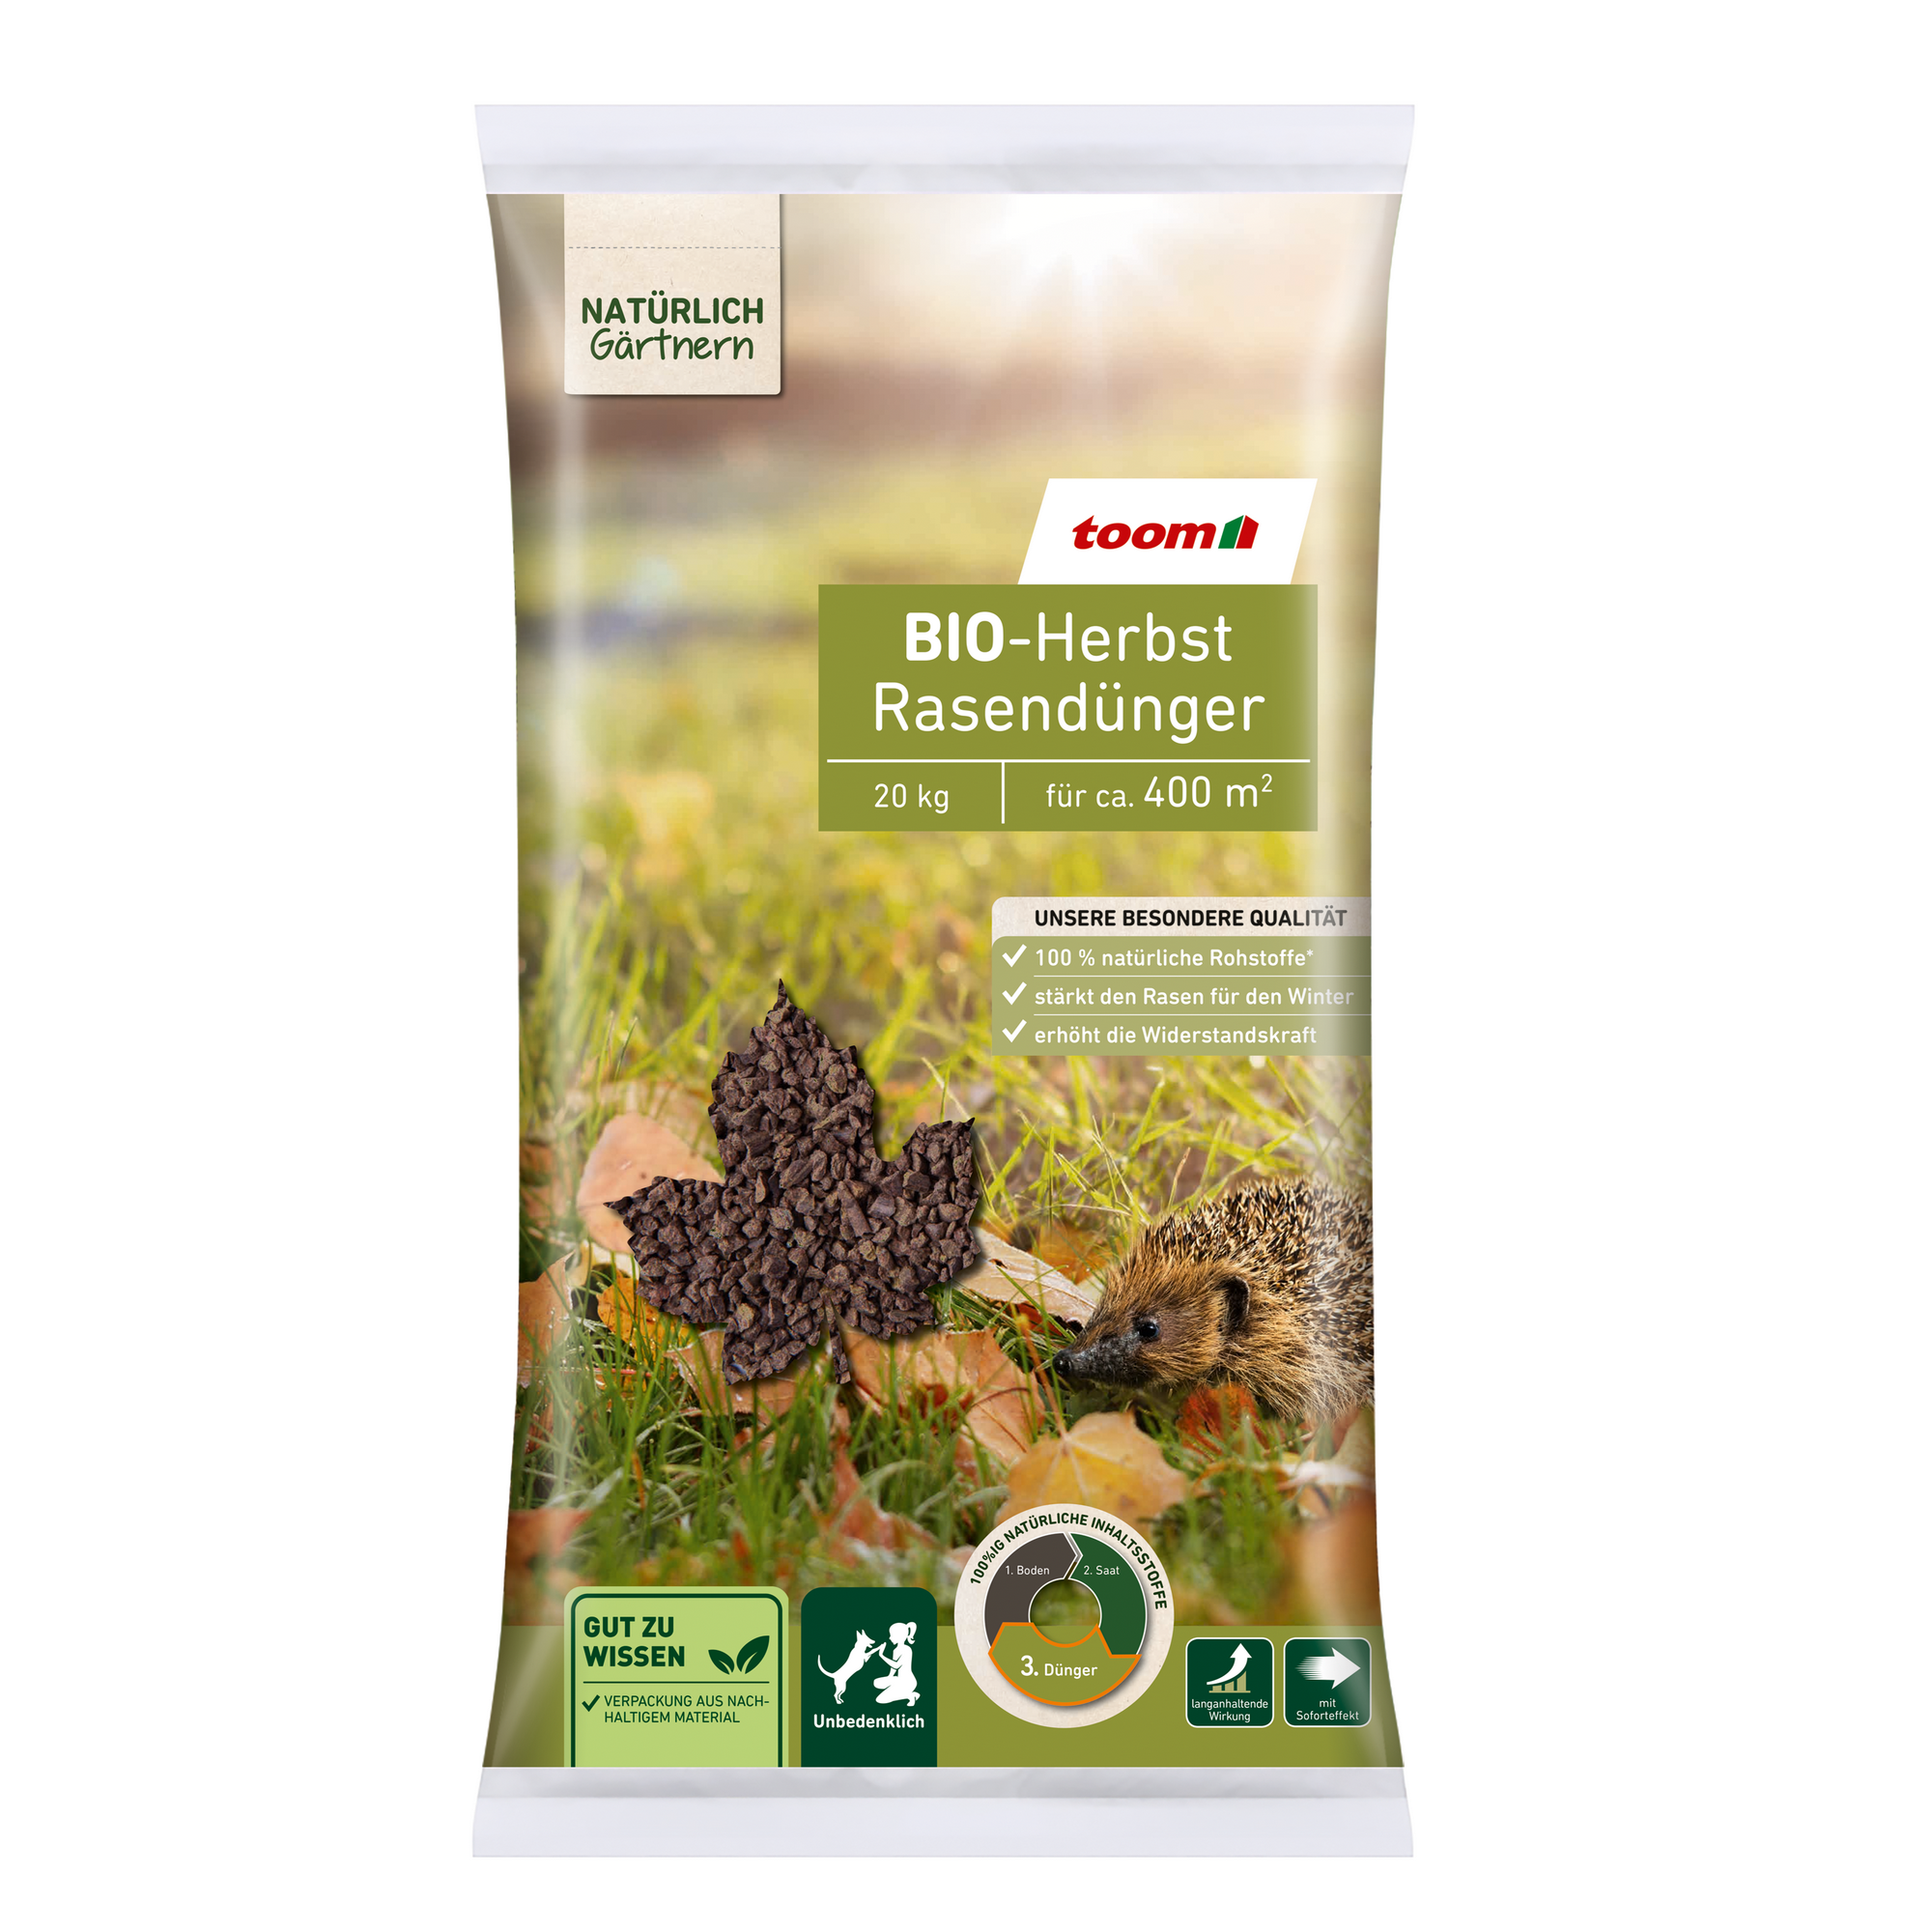 Bio-Herbstrasendünger 20 kg + product picture